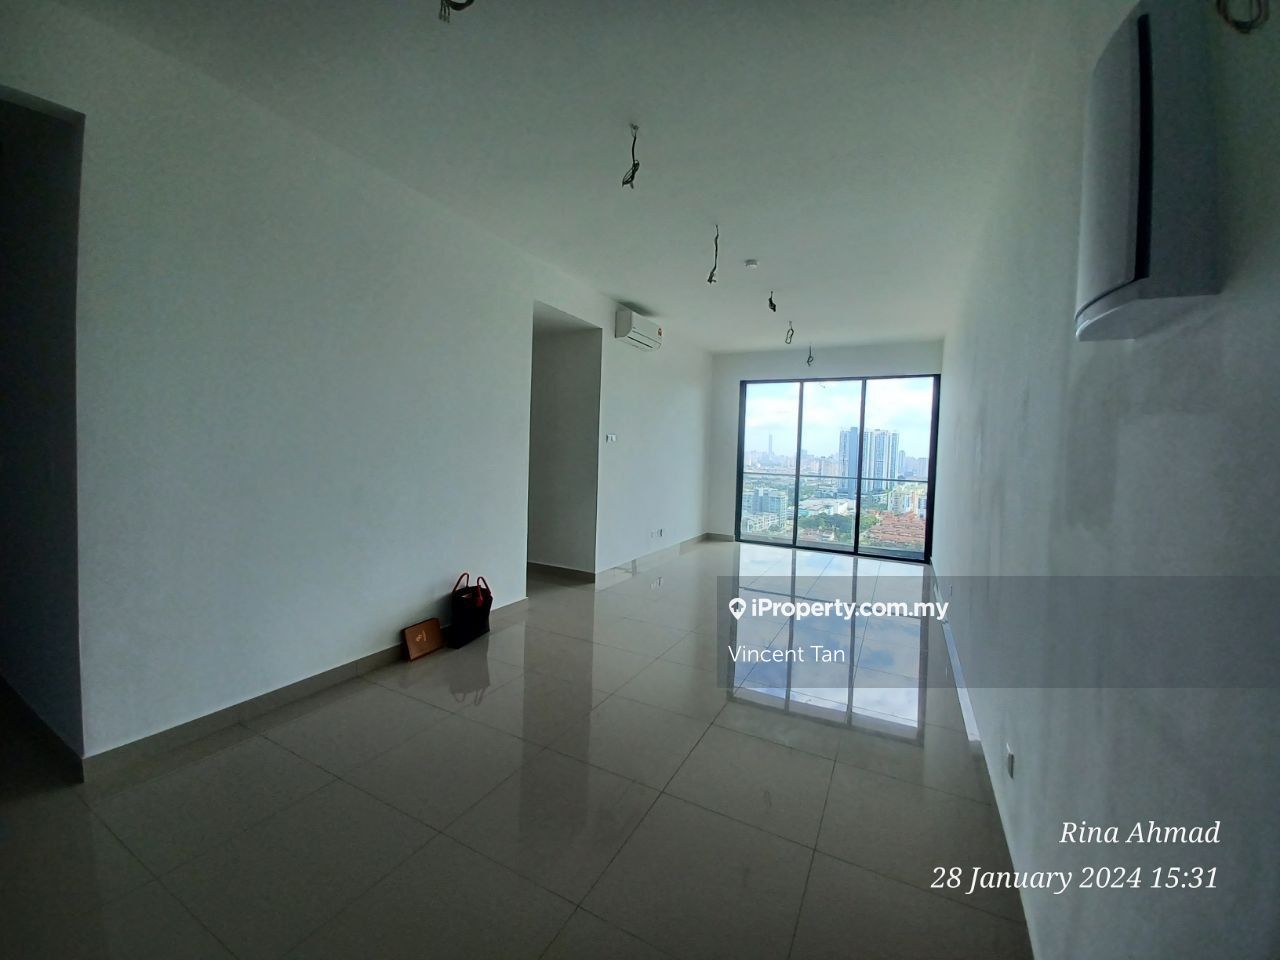 Apartment For Rent @ 99 Residence, Batu Caves